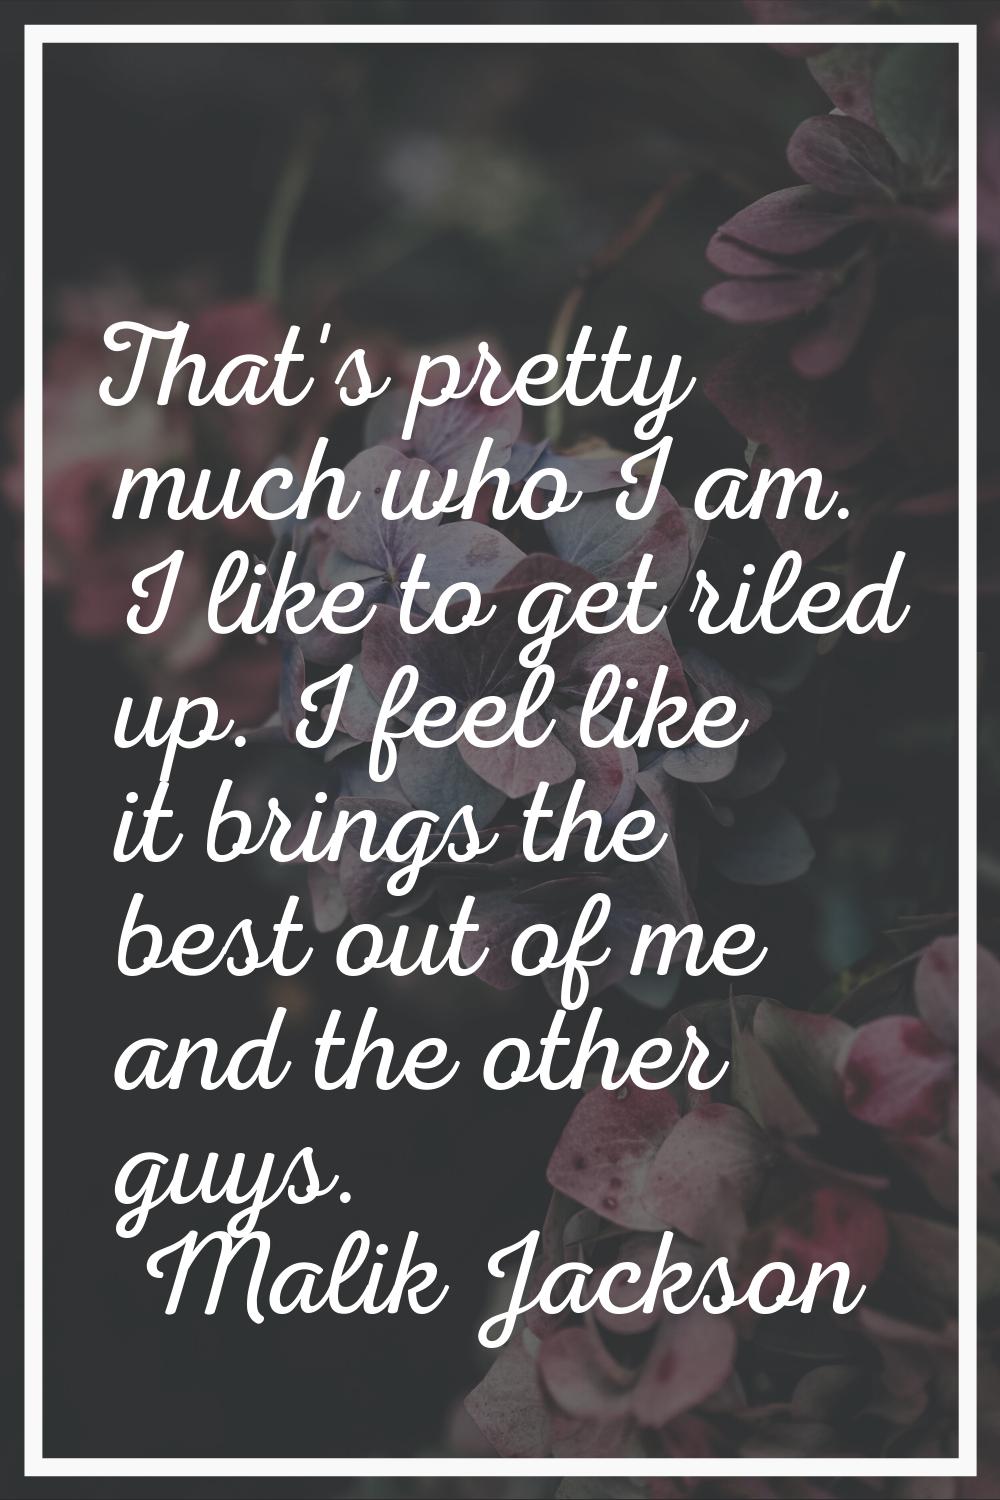 That's pretty much who I am. I like to get riled up. I feel like it brings the best out of me and t